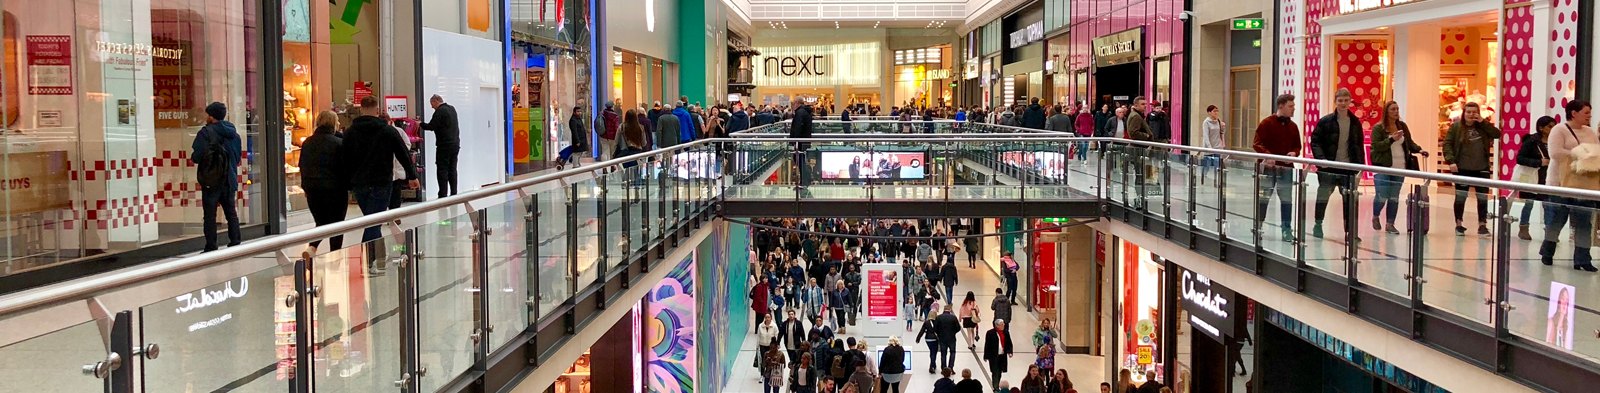 people walking through a crowded shopping centre